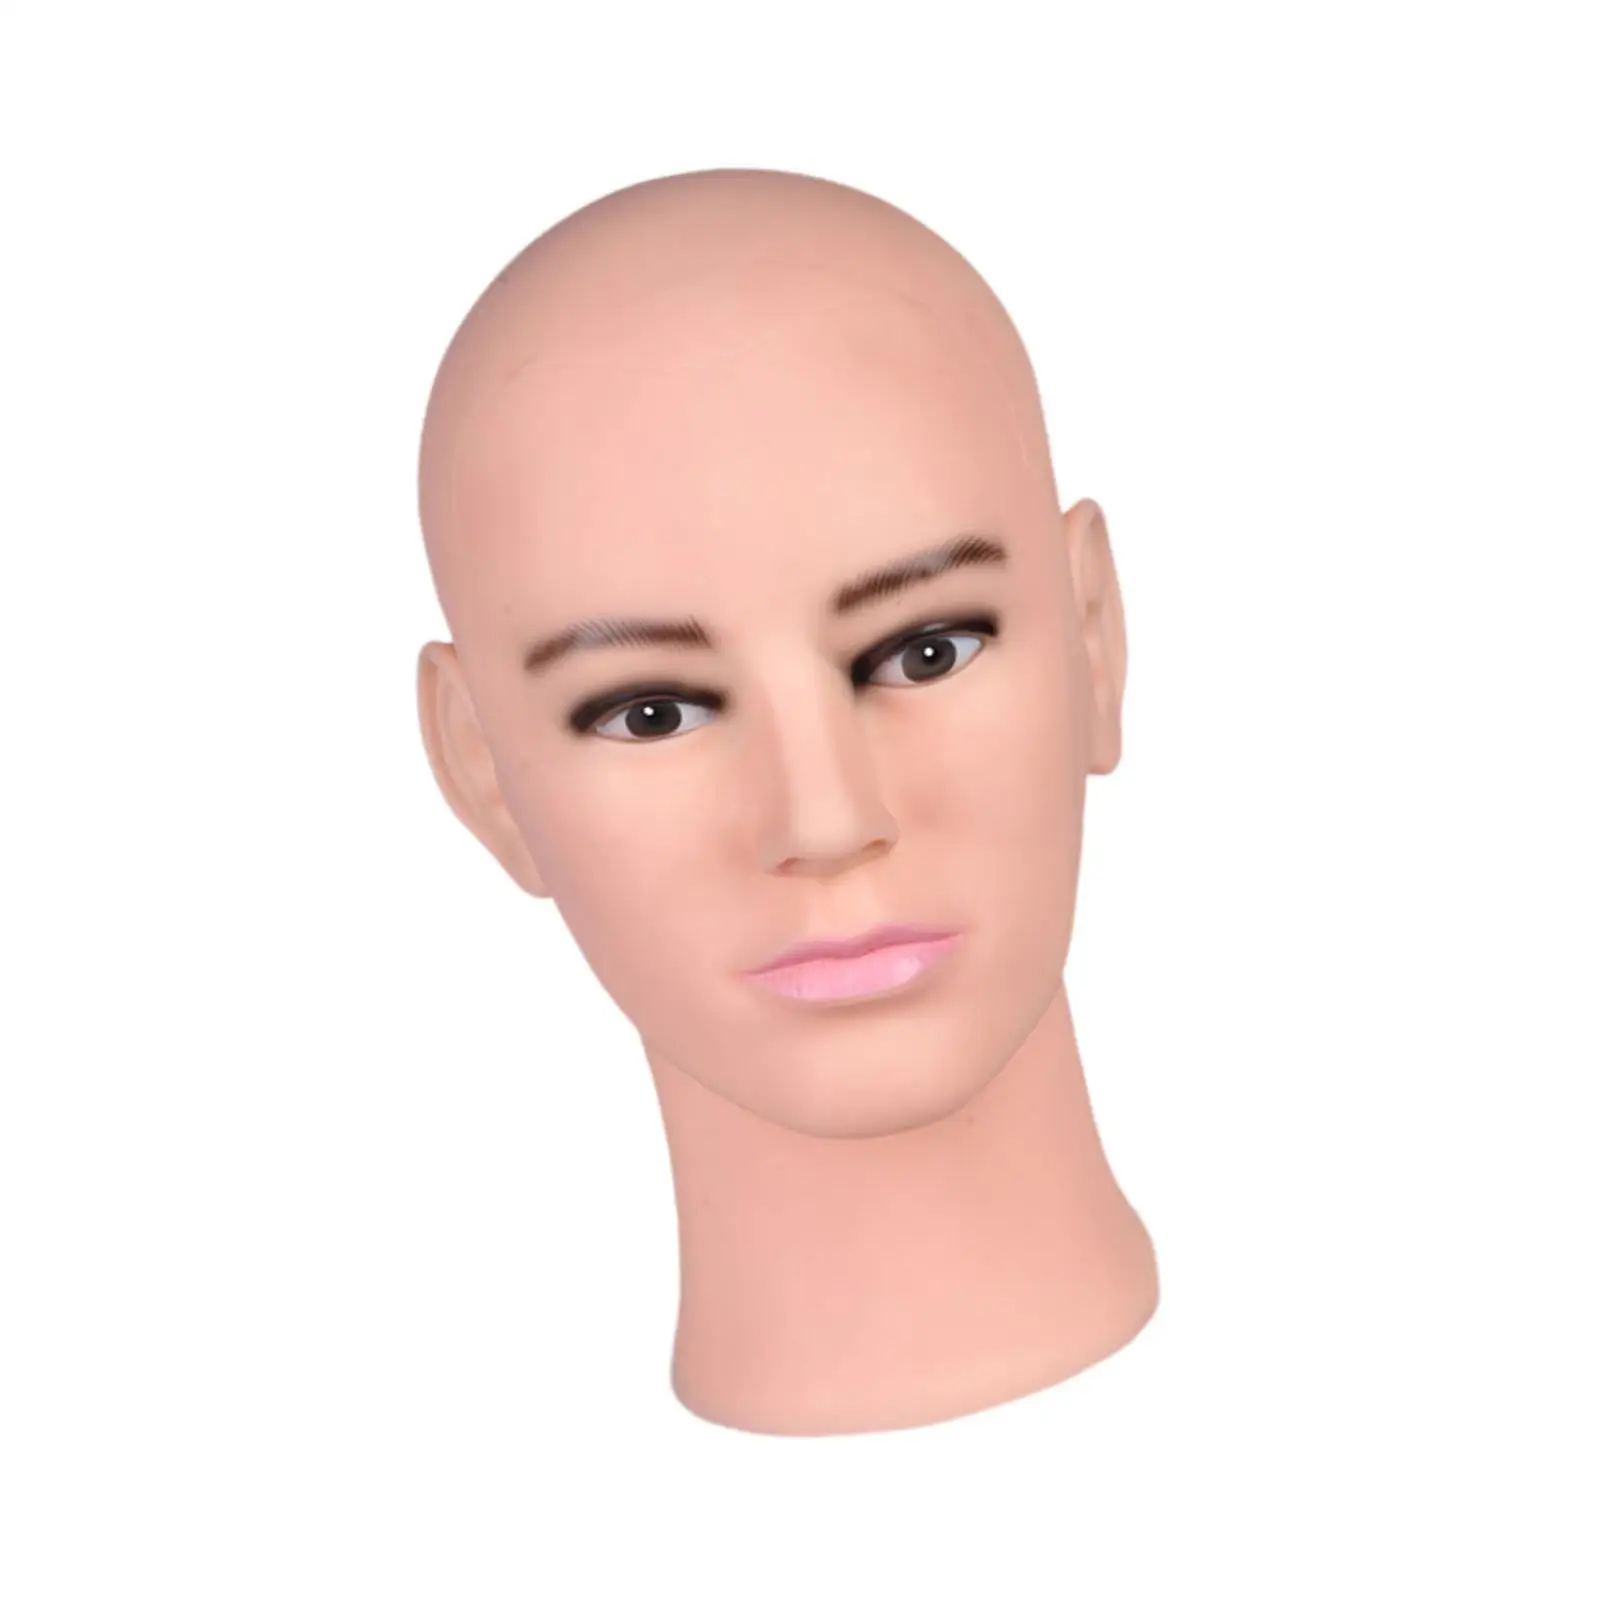 

Male Bald Mannequin Head Model,Manikin Head Model,Hat Display Rack,Wig Display Stand Model for Wigs Displaying,Making Styling